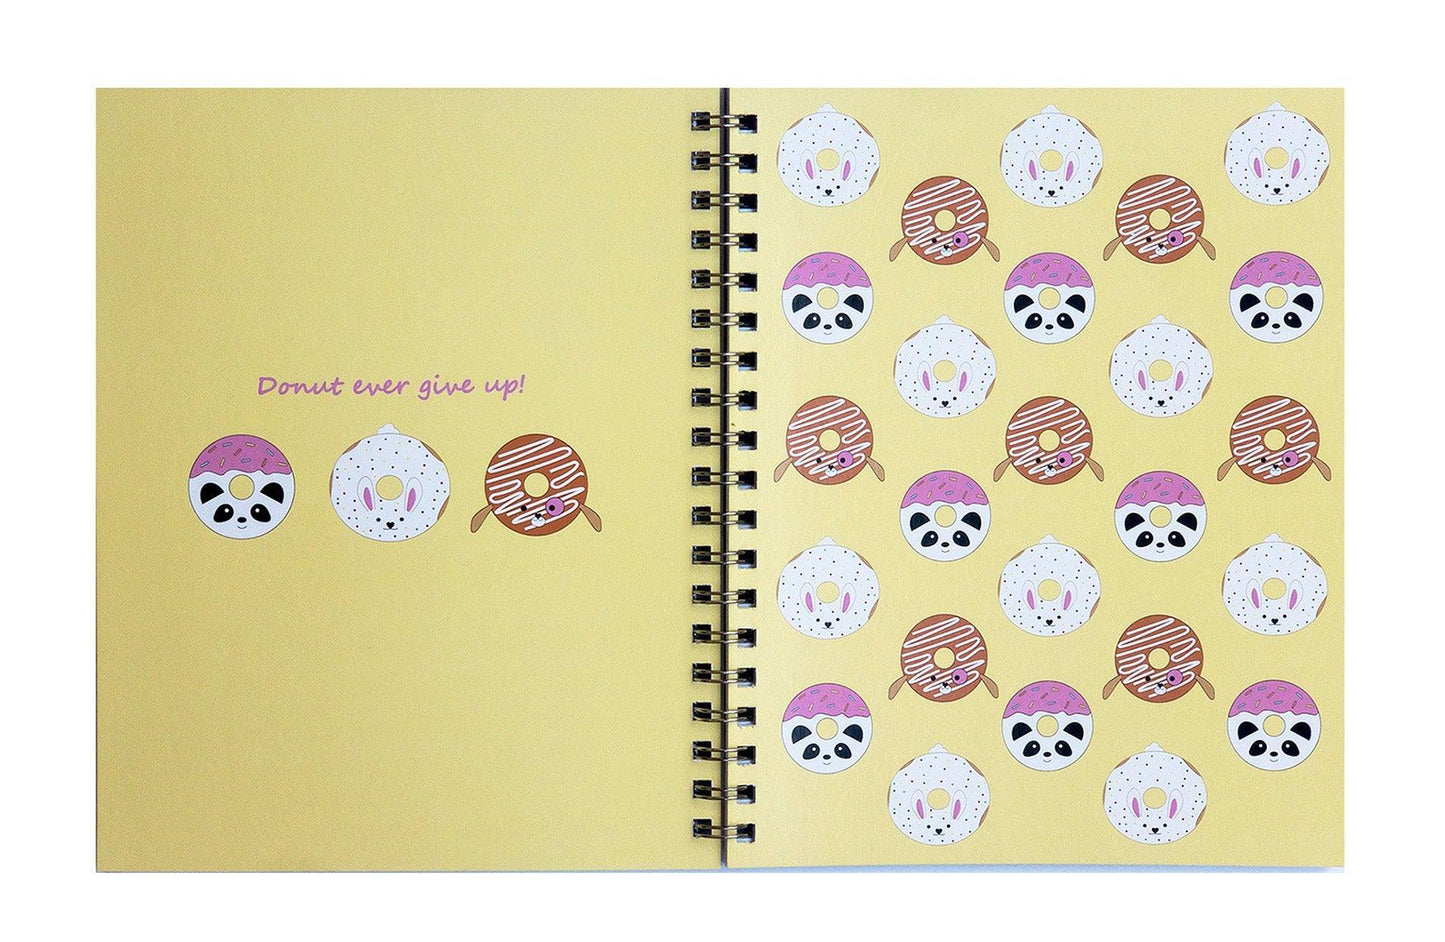 Donut Ever Give Up Journal - Cute donut animal characters remind children Donut Ever Give Up! Set against a yellow backdrop. 